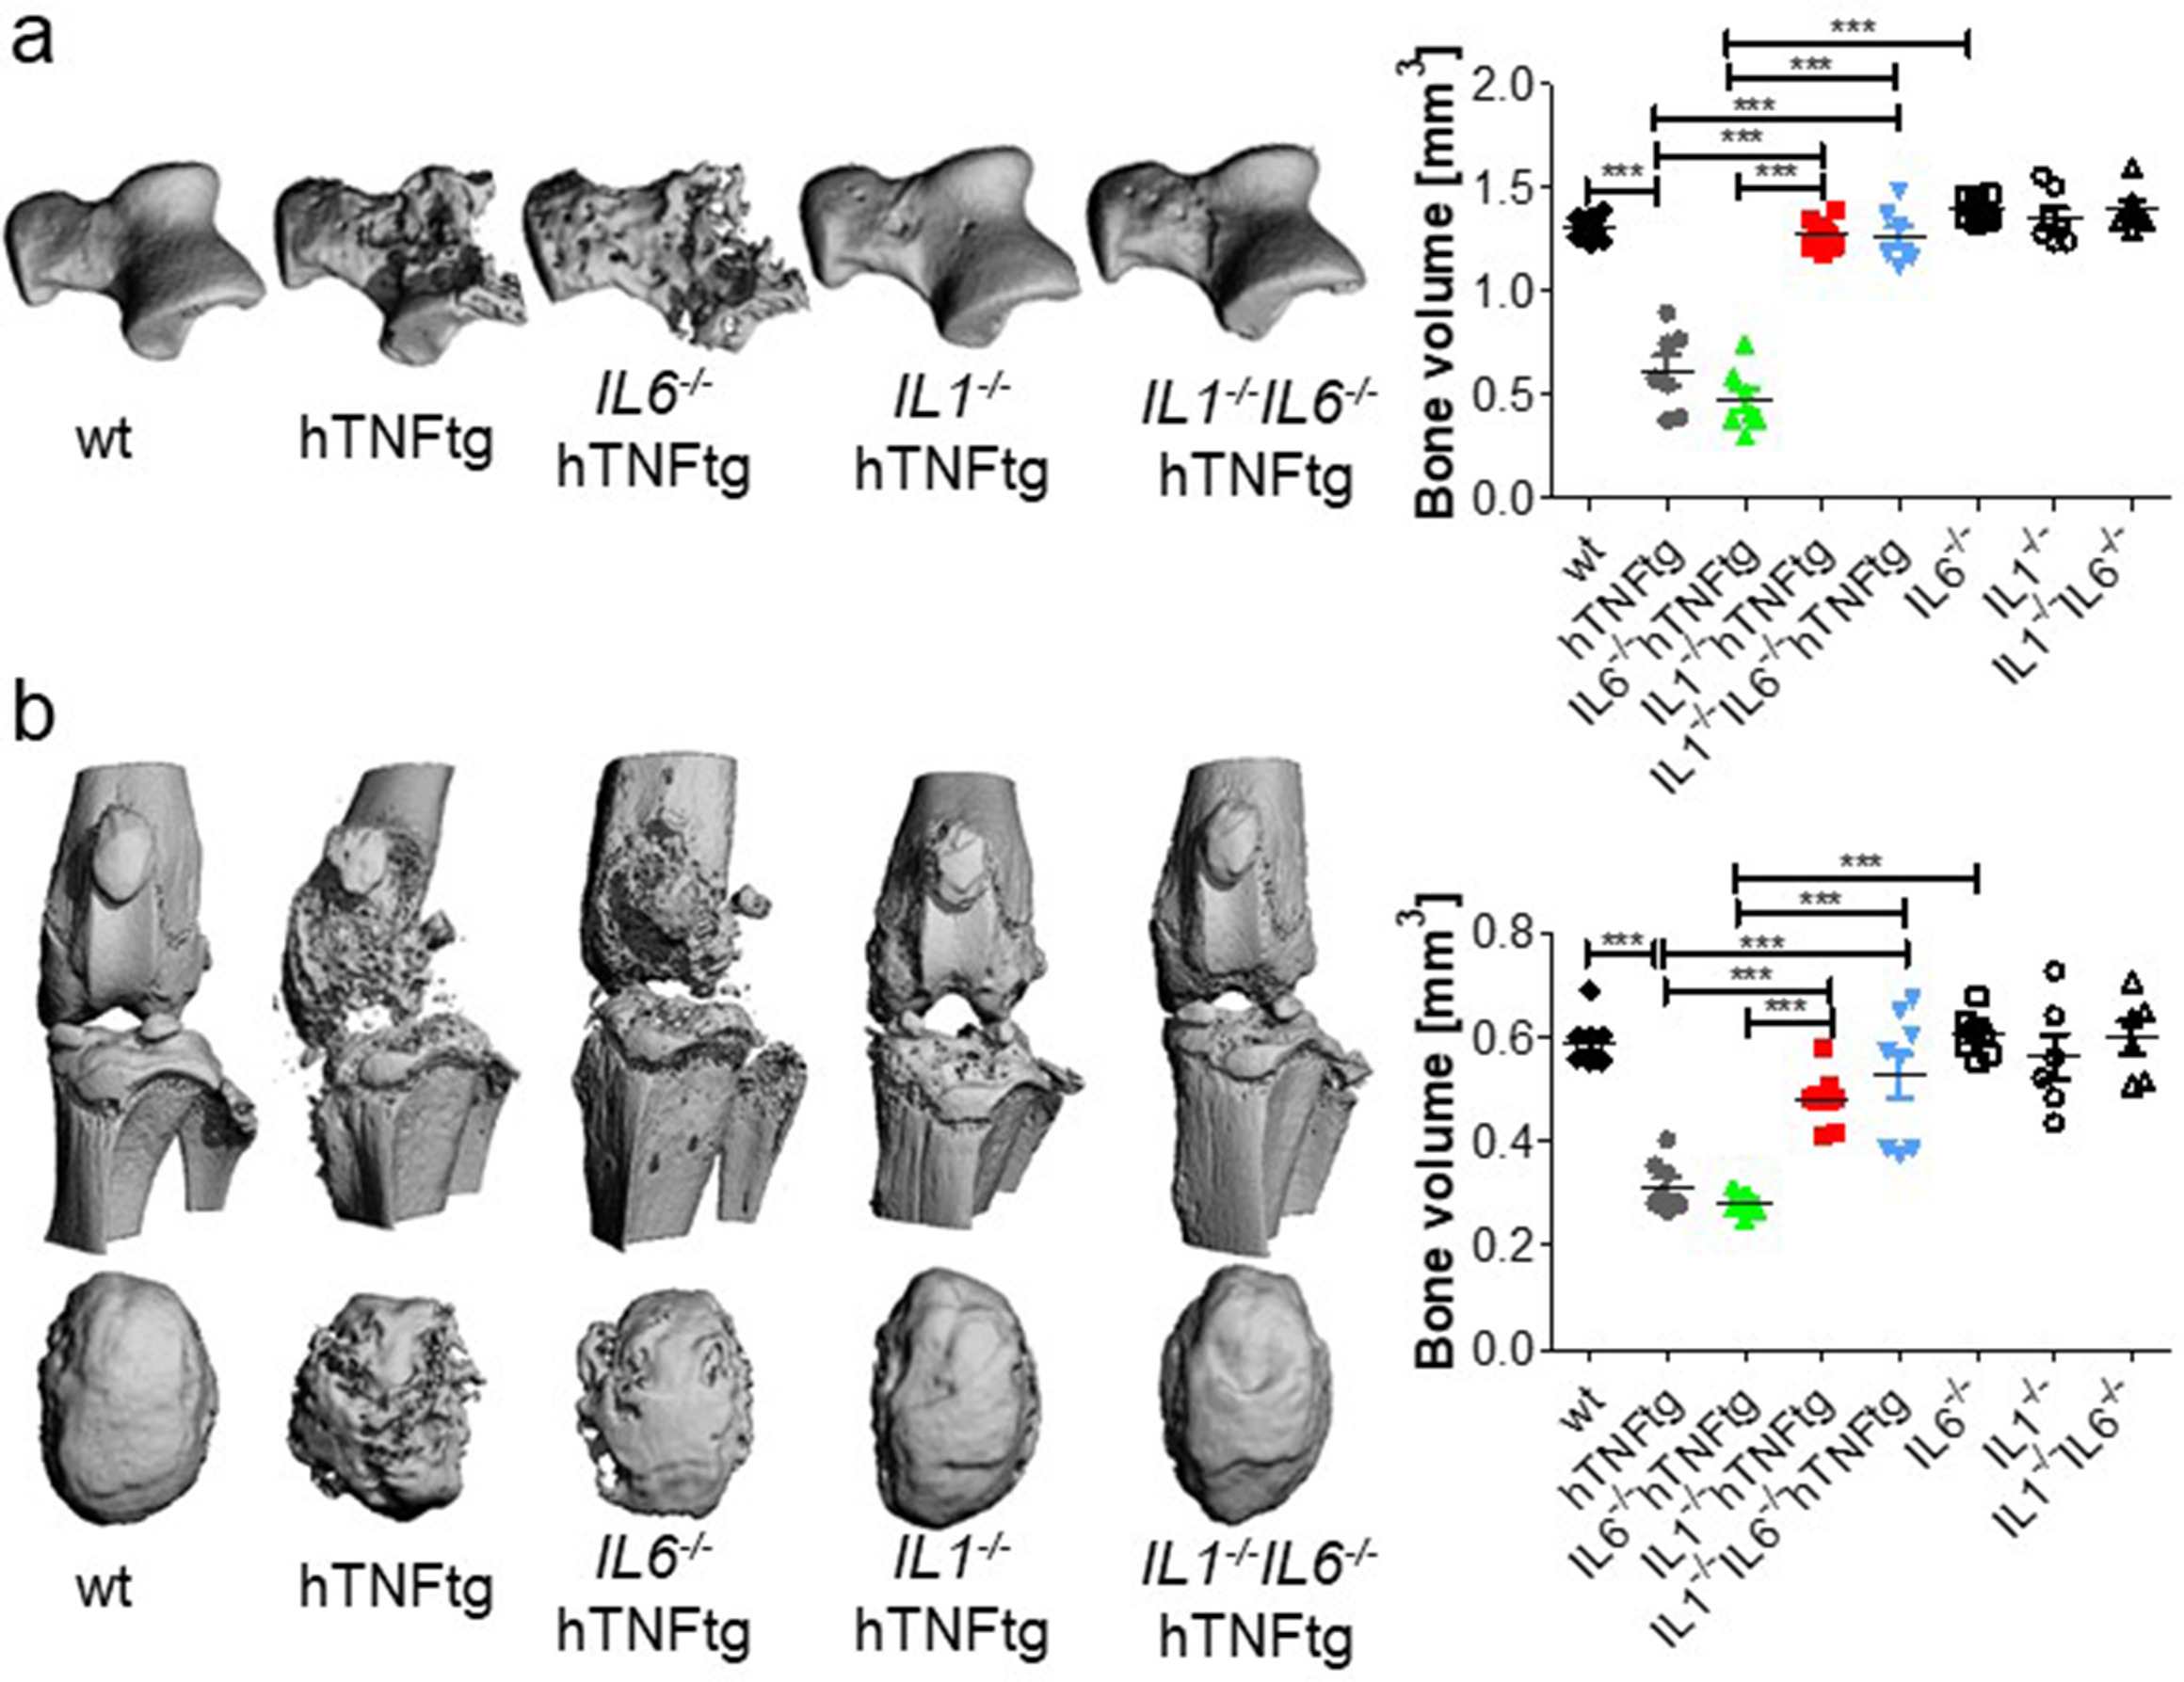 Fig. 2 
            Micro-CT (µCT)-based assessment of local inflammatory bone damage in ankle and knee joints from IL1-/-IL6-/-hTNFtg, IL1-/-hTNFtg, IL6-/-hTNFtg, and hTNFtg mice at the age of 15 weeks after birth. a) Representative 3D image from talus bone and quantitative analysis of bone volume (mm3) indicating local bone damage in arthritic mice. b) Representative 3D images from knee joints and patella, as well as quantitative analysis of bone volume (mm3) from patella indicating local bone damage or preservation of bone architecture. Data are expressed as mean (standard error of the mean (SEM)). N = 7 males per group. ***p < 0.001, one-way analysis of variance (ANOVA) and Tukey’s post hoc test. hTNFtg, human tumour necrosis factor transgenic; IL, interleukin; wt, wild-type.
          